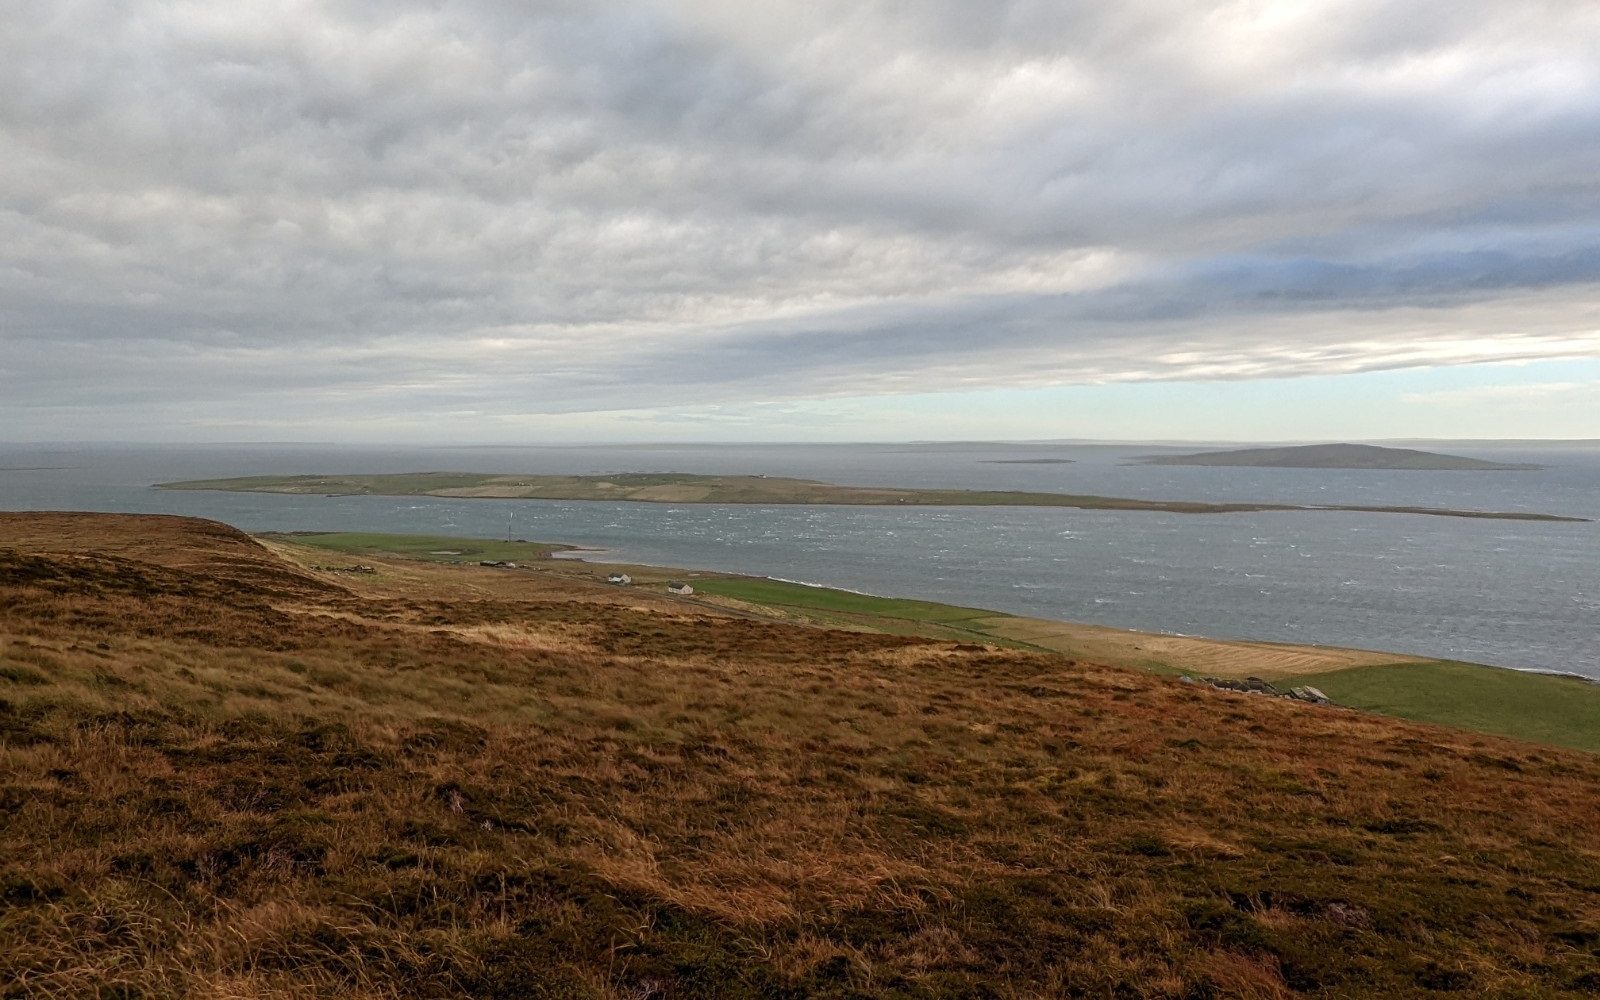 Standing in yellow and brown moor grass on a hillside, a very thin and low-lying island is in the middle of an expansive body of water in the distance. Several other low islands rise up beyond it, with grey cloud cover above.